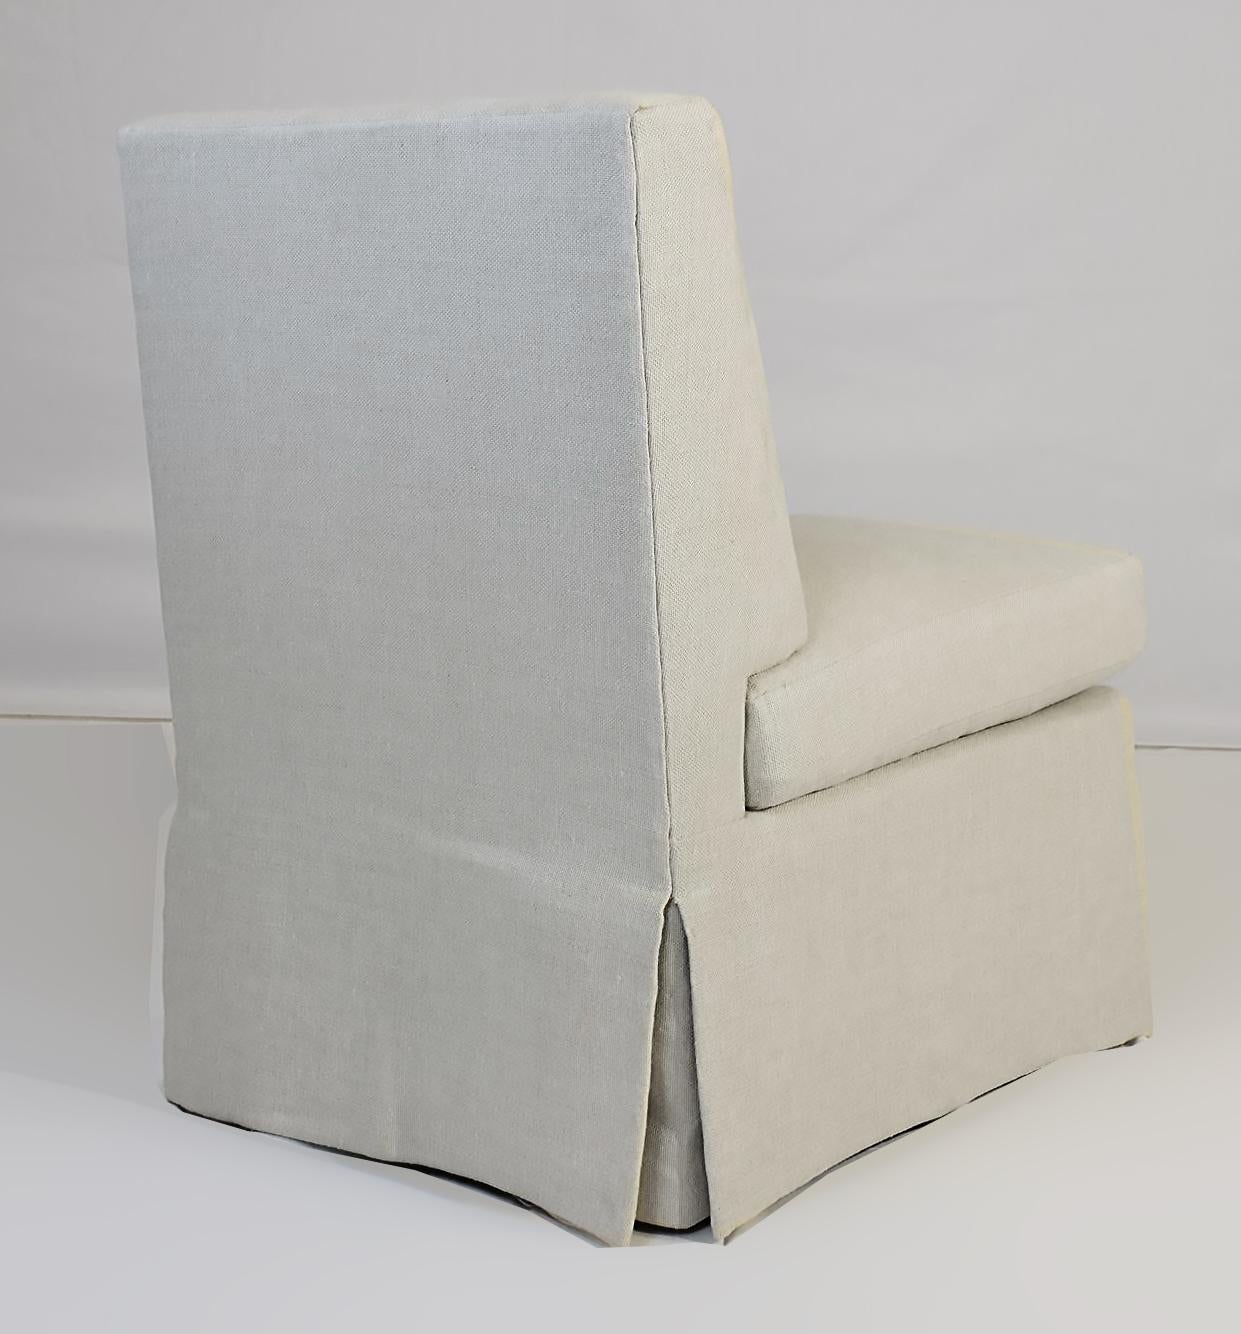 Le Jeune Upholstery Ella Slipper Chair Floor Sample in Ivory In Good Condition For Sale In Miami, FL